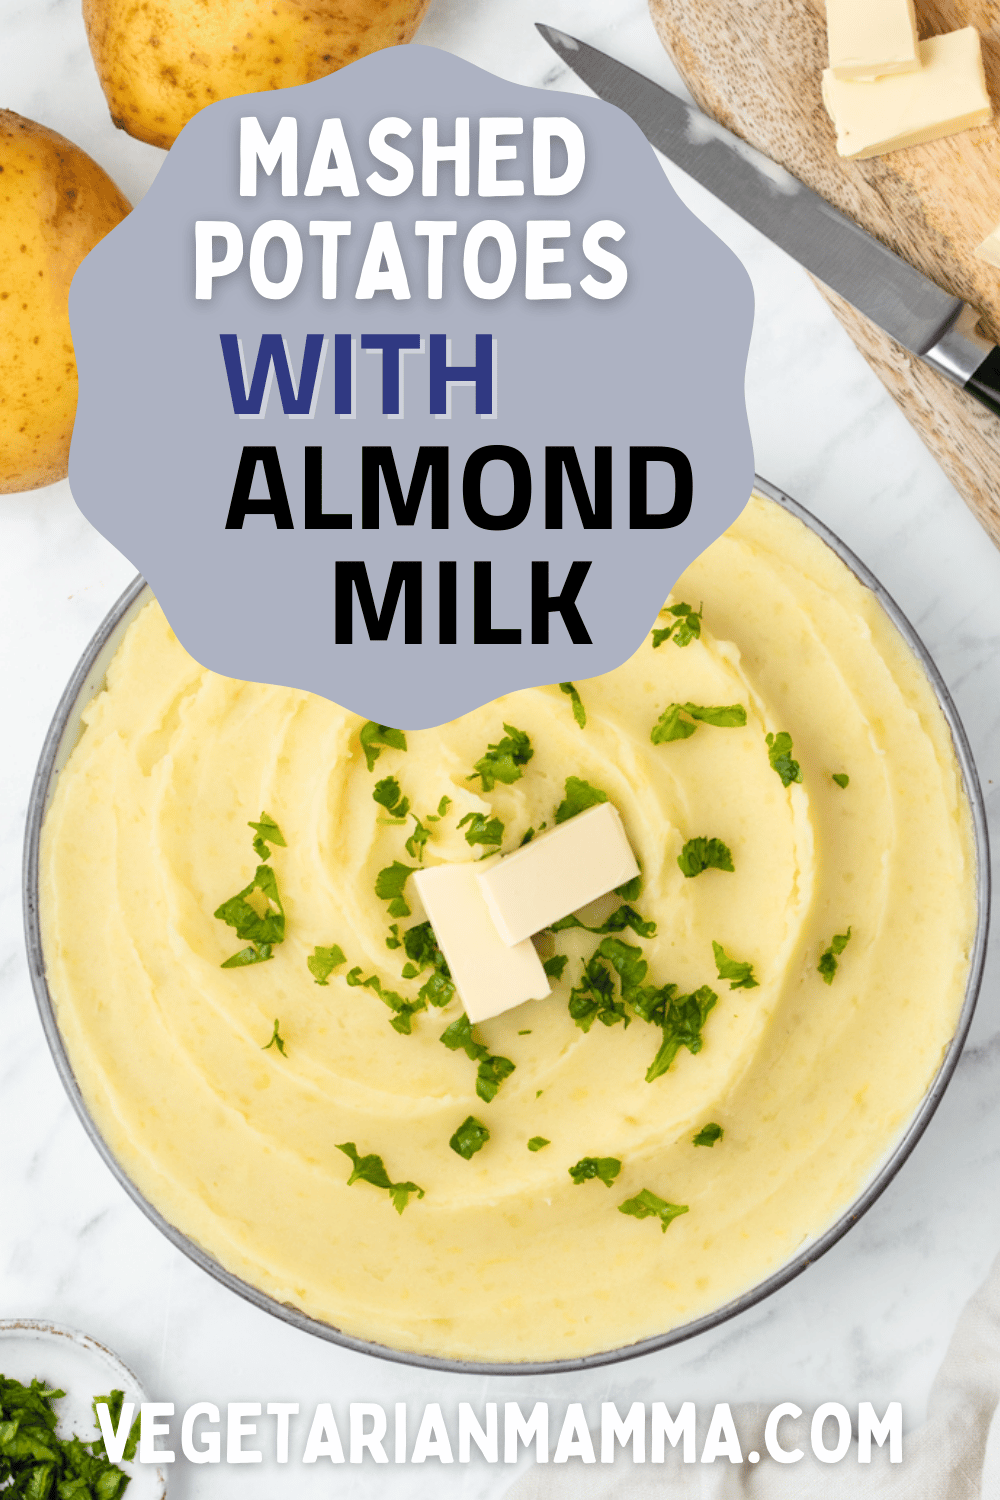 These Mashed Potatoes with Almond Milk are rich, creamy and flavorful! These comforting vegan mashed potatoes are foolproof!  | vegan mashed potato recipe | dairy free mashed potatoes